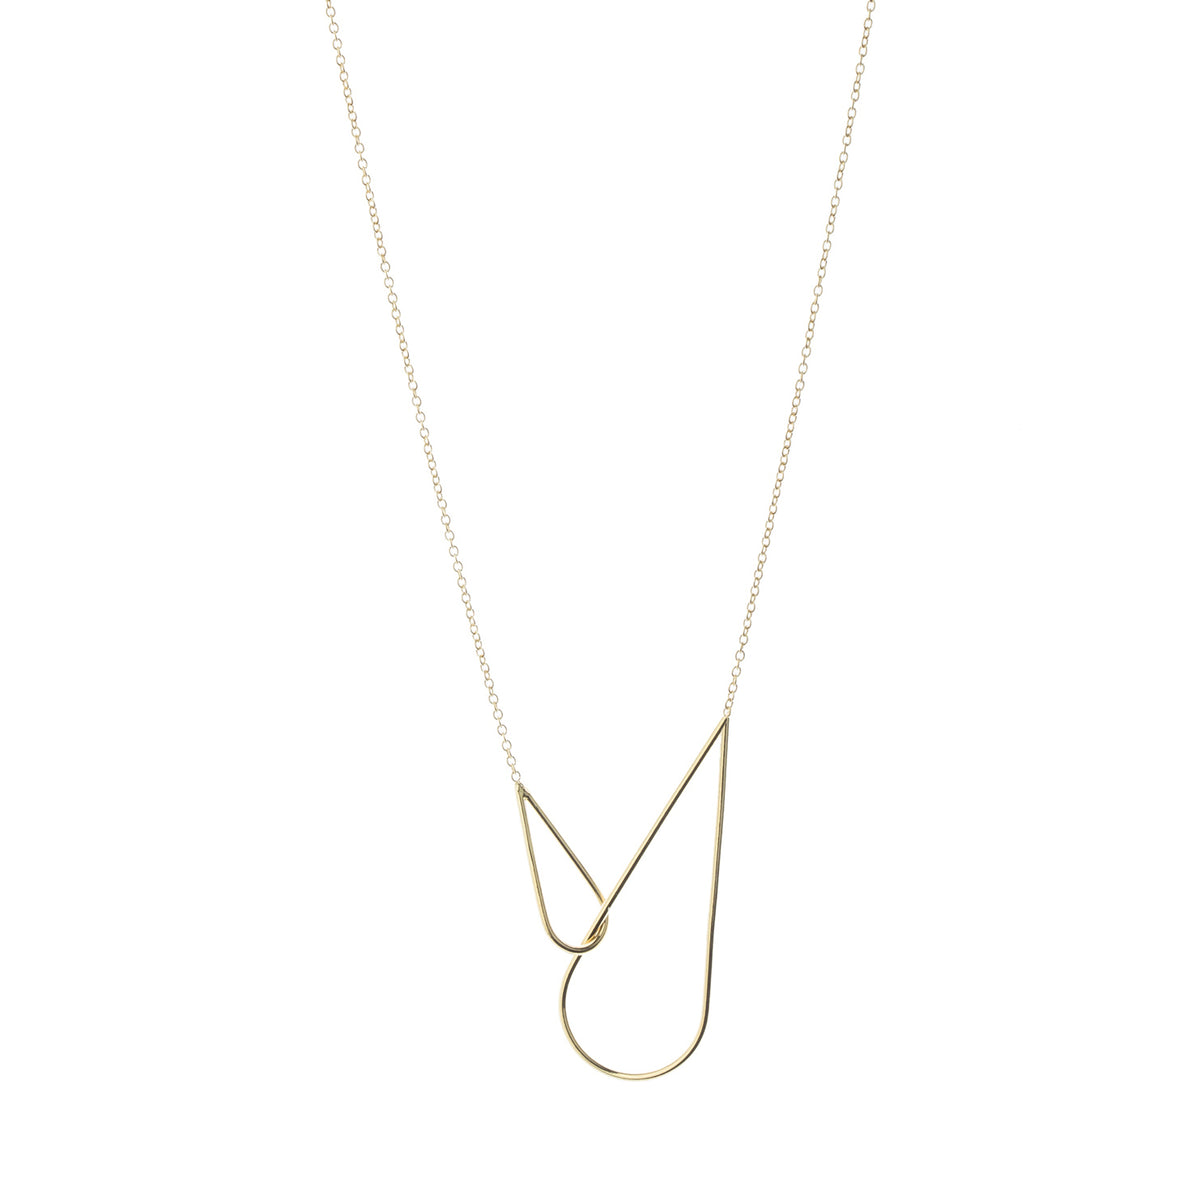 Gold Plated Silver Raindrops Necklace by Brussels jewelry designer Aurore Havenne, a best-seller of the brand